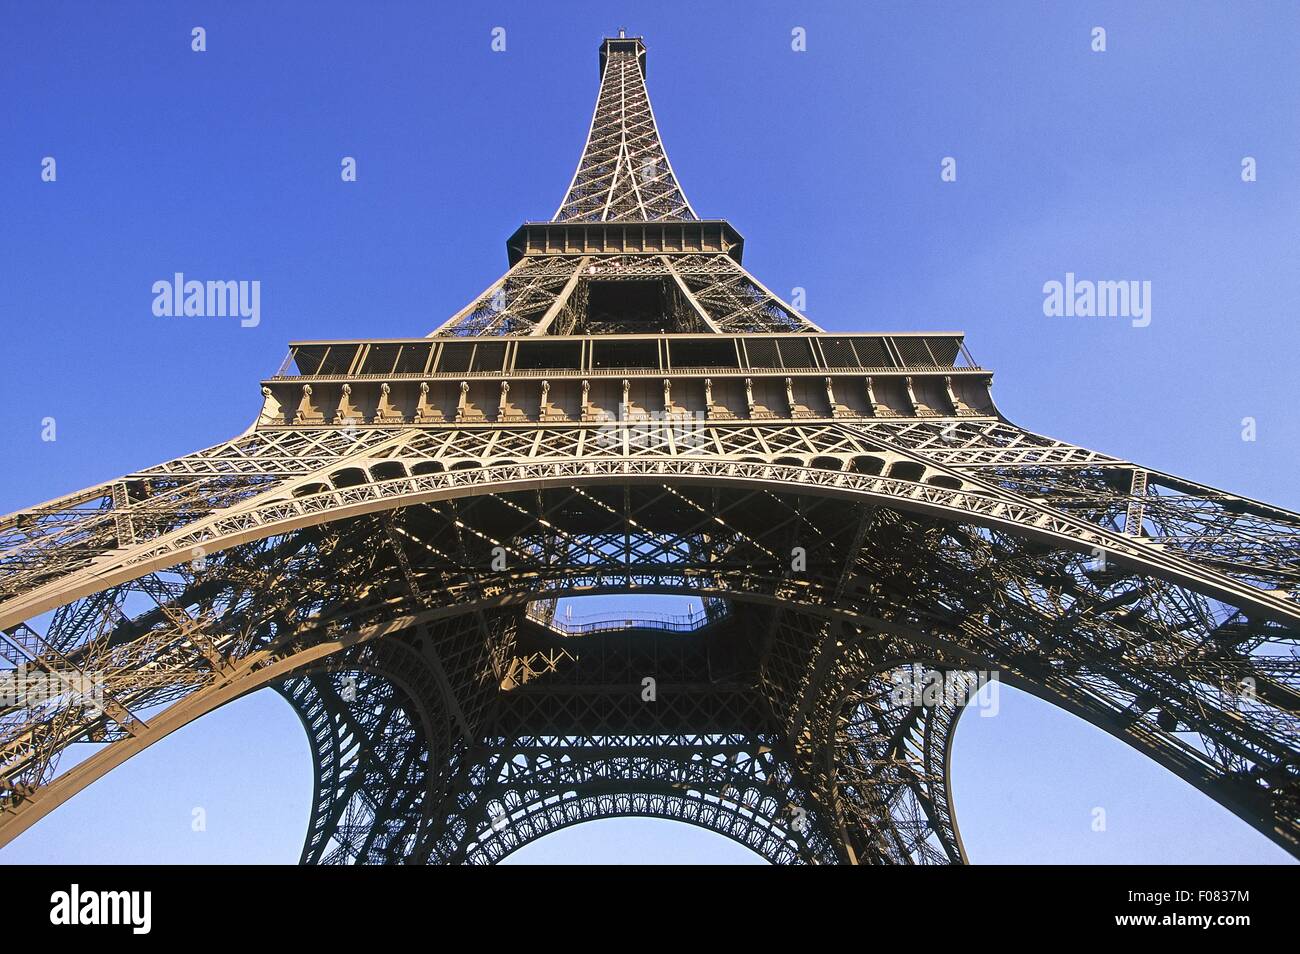 Elevated view of Eiffel tower with sky, Paris, France Stock Photo